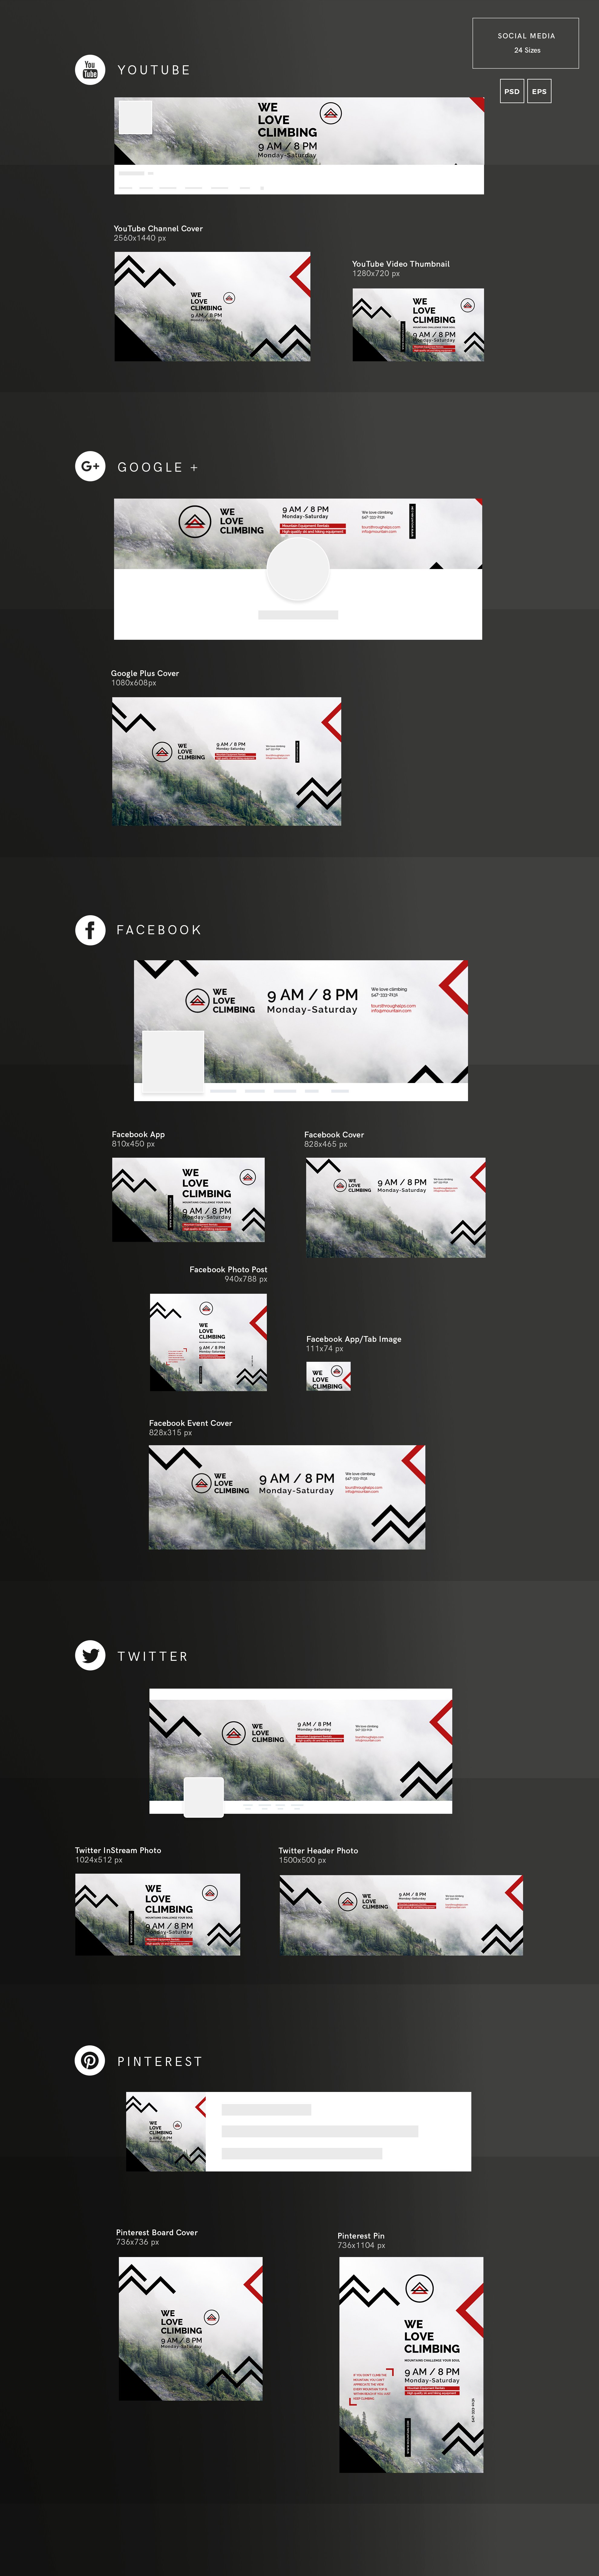 Social Media Pack | Mountain preview image.